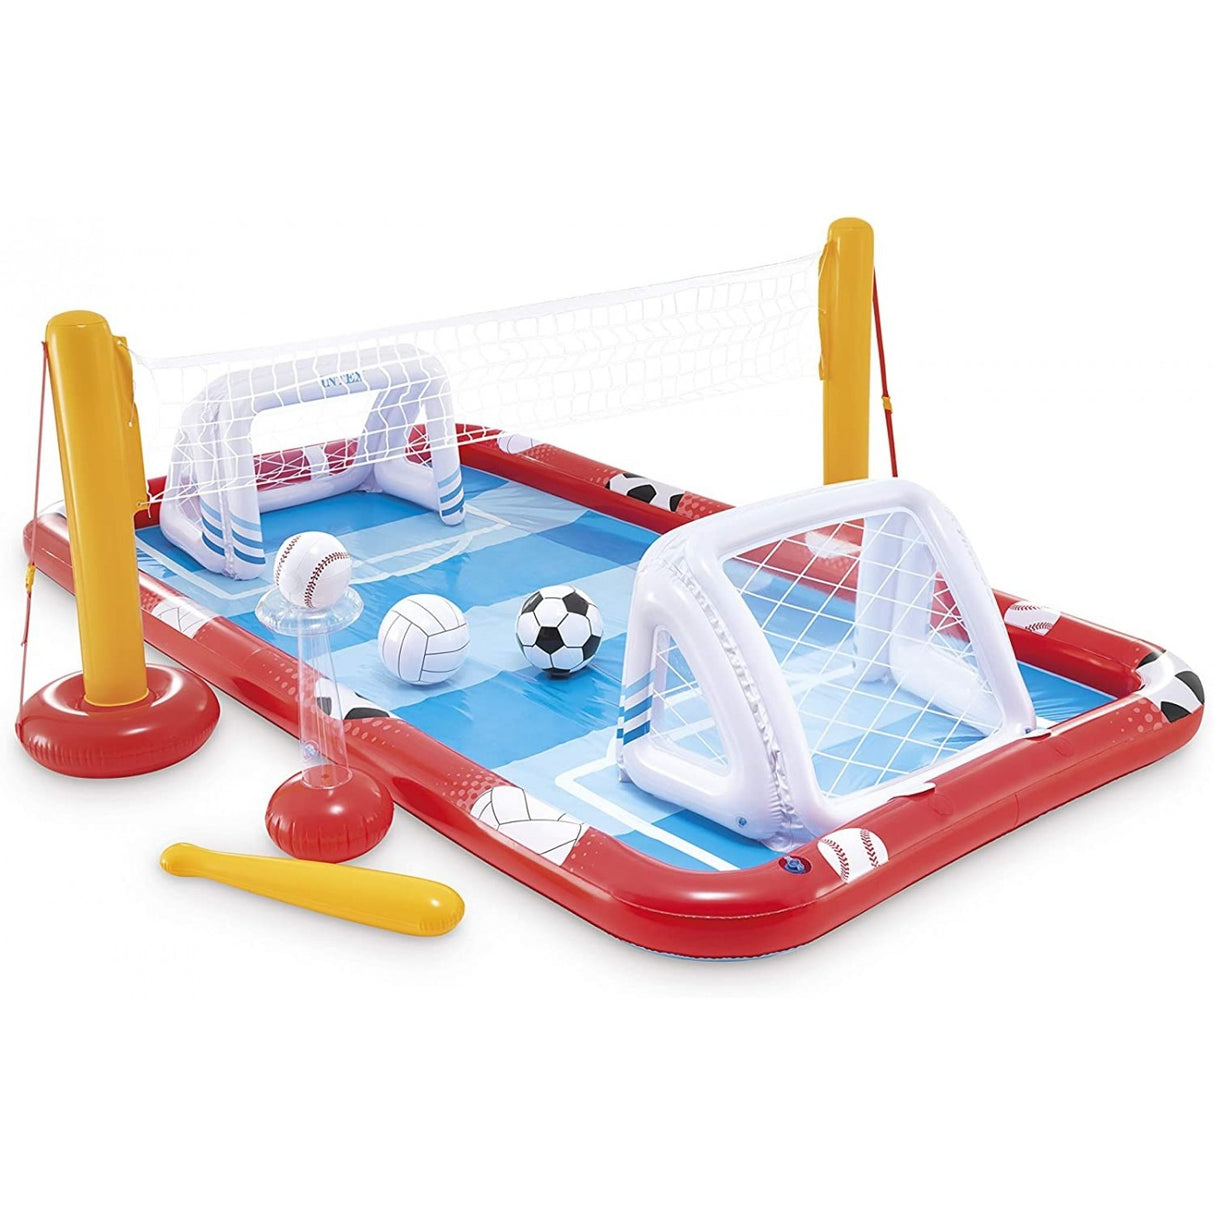 ACTION SPORTS PLAY CENTER